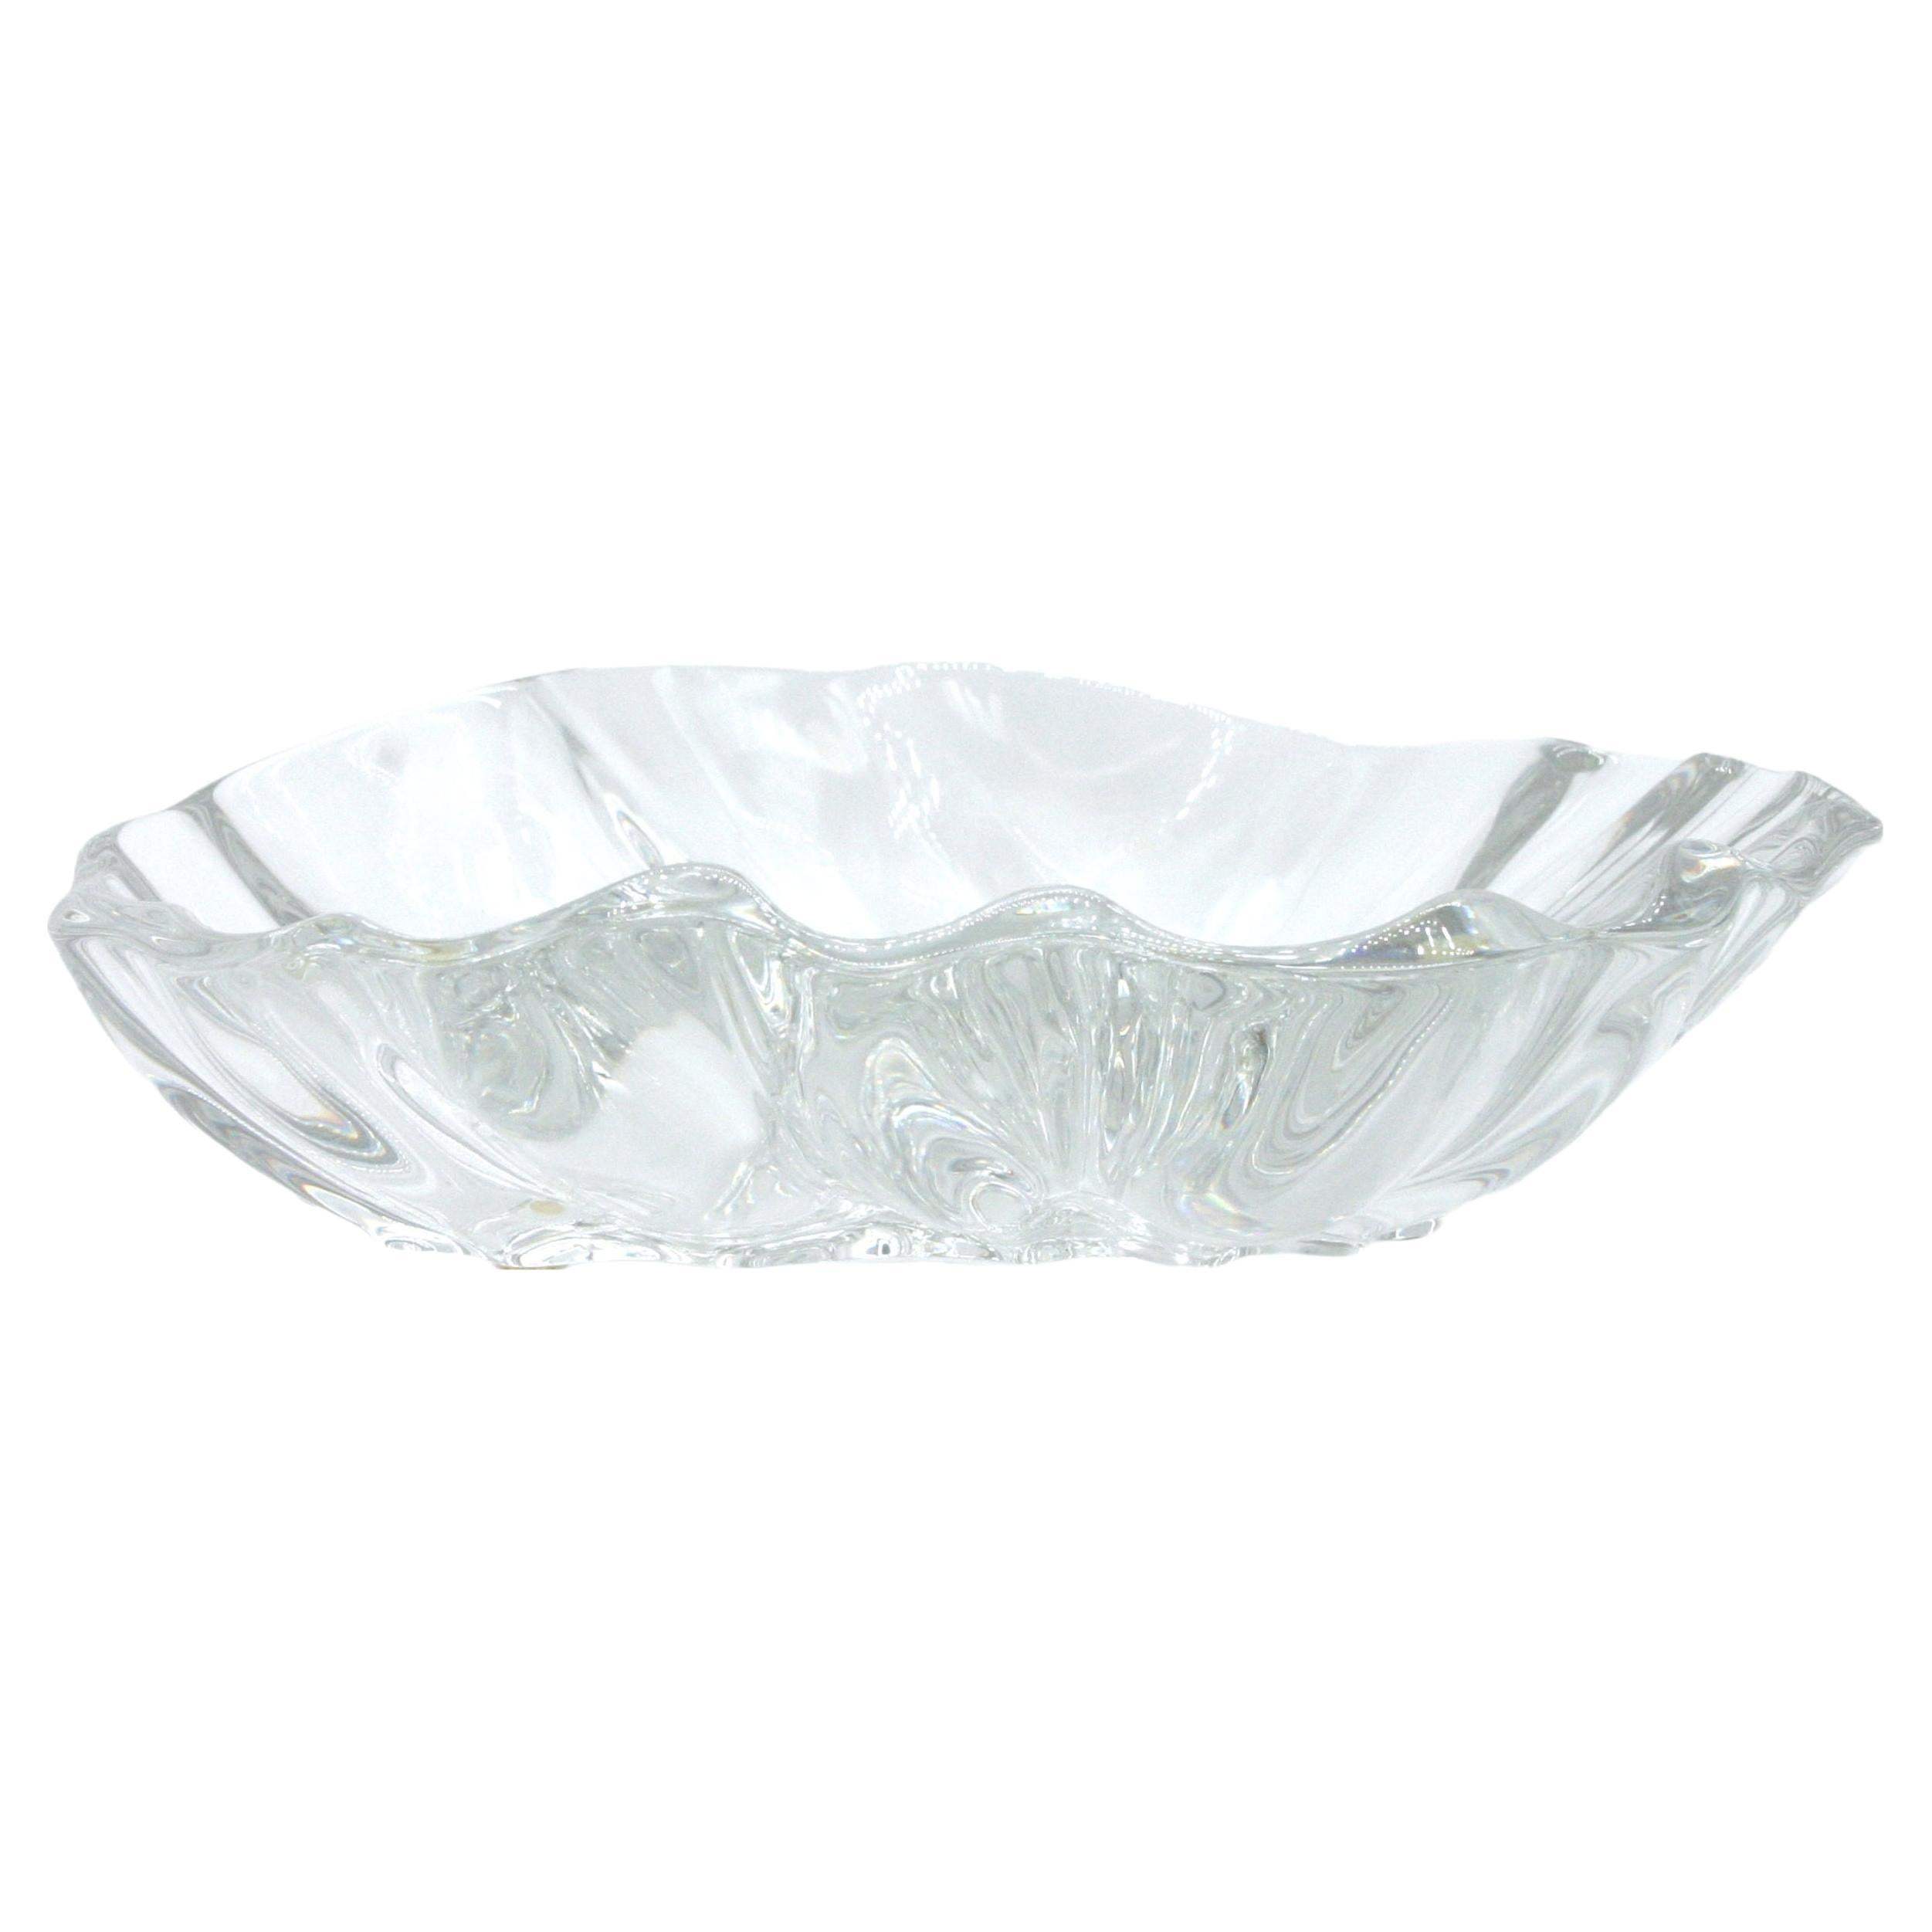 Beautifully hand crafted baccarat crystal decorative centerpiece bowl. The piece is in excellent condition. Maker's mark etched underneath. Minor shelves wear. The centerpiece measures 9.75 inches X 9.25 inches X 3.25 inches.